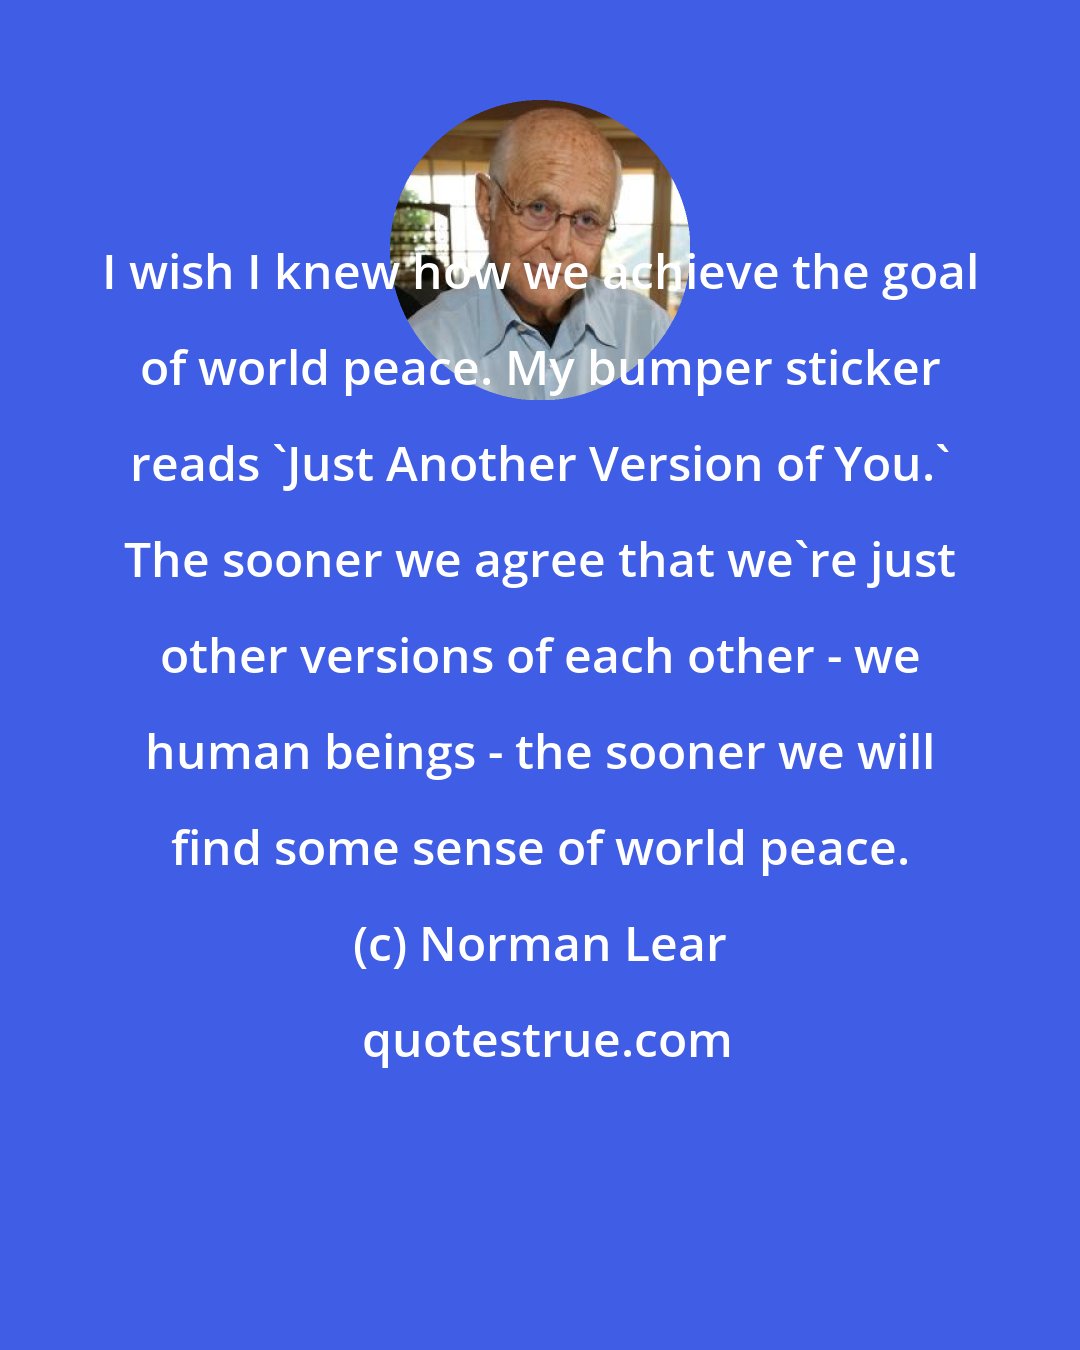 Norman Lear: I wish I knew how we achieve the goal of world peace. My bumper sticker reads 'Just Another Version of You.' The sooner we agree that we're just other versions of each other - we human beings - the sooner we will find some sense of world peace.